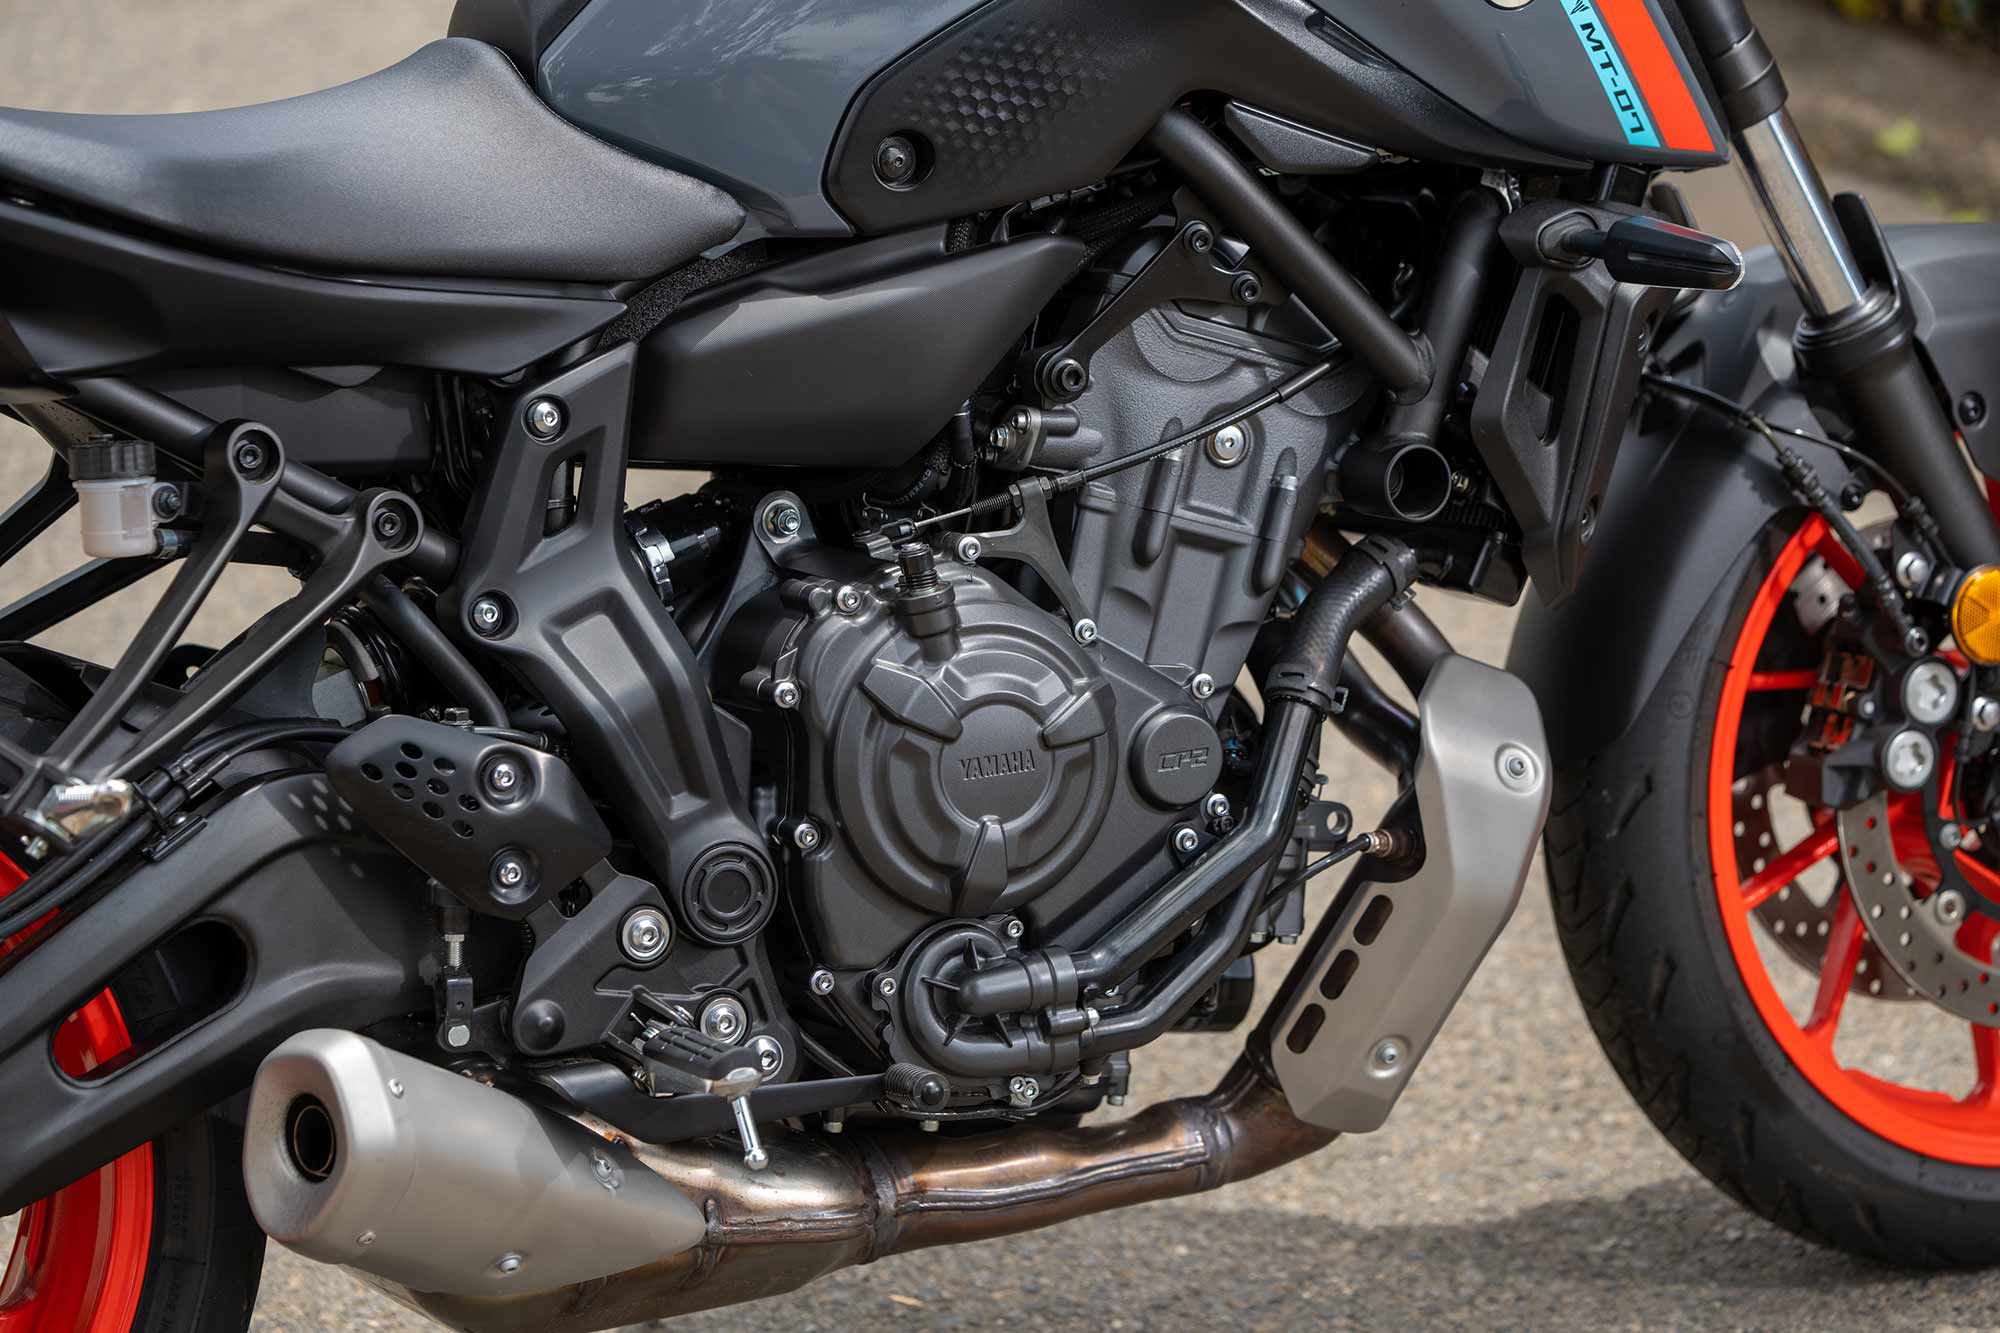 Yamaha’s naked bike continues to be powered by its fantastic 689cc CP2 parallel-twin. The engine is compact with loads of grunt. Engine character is improved for 2021.